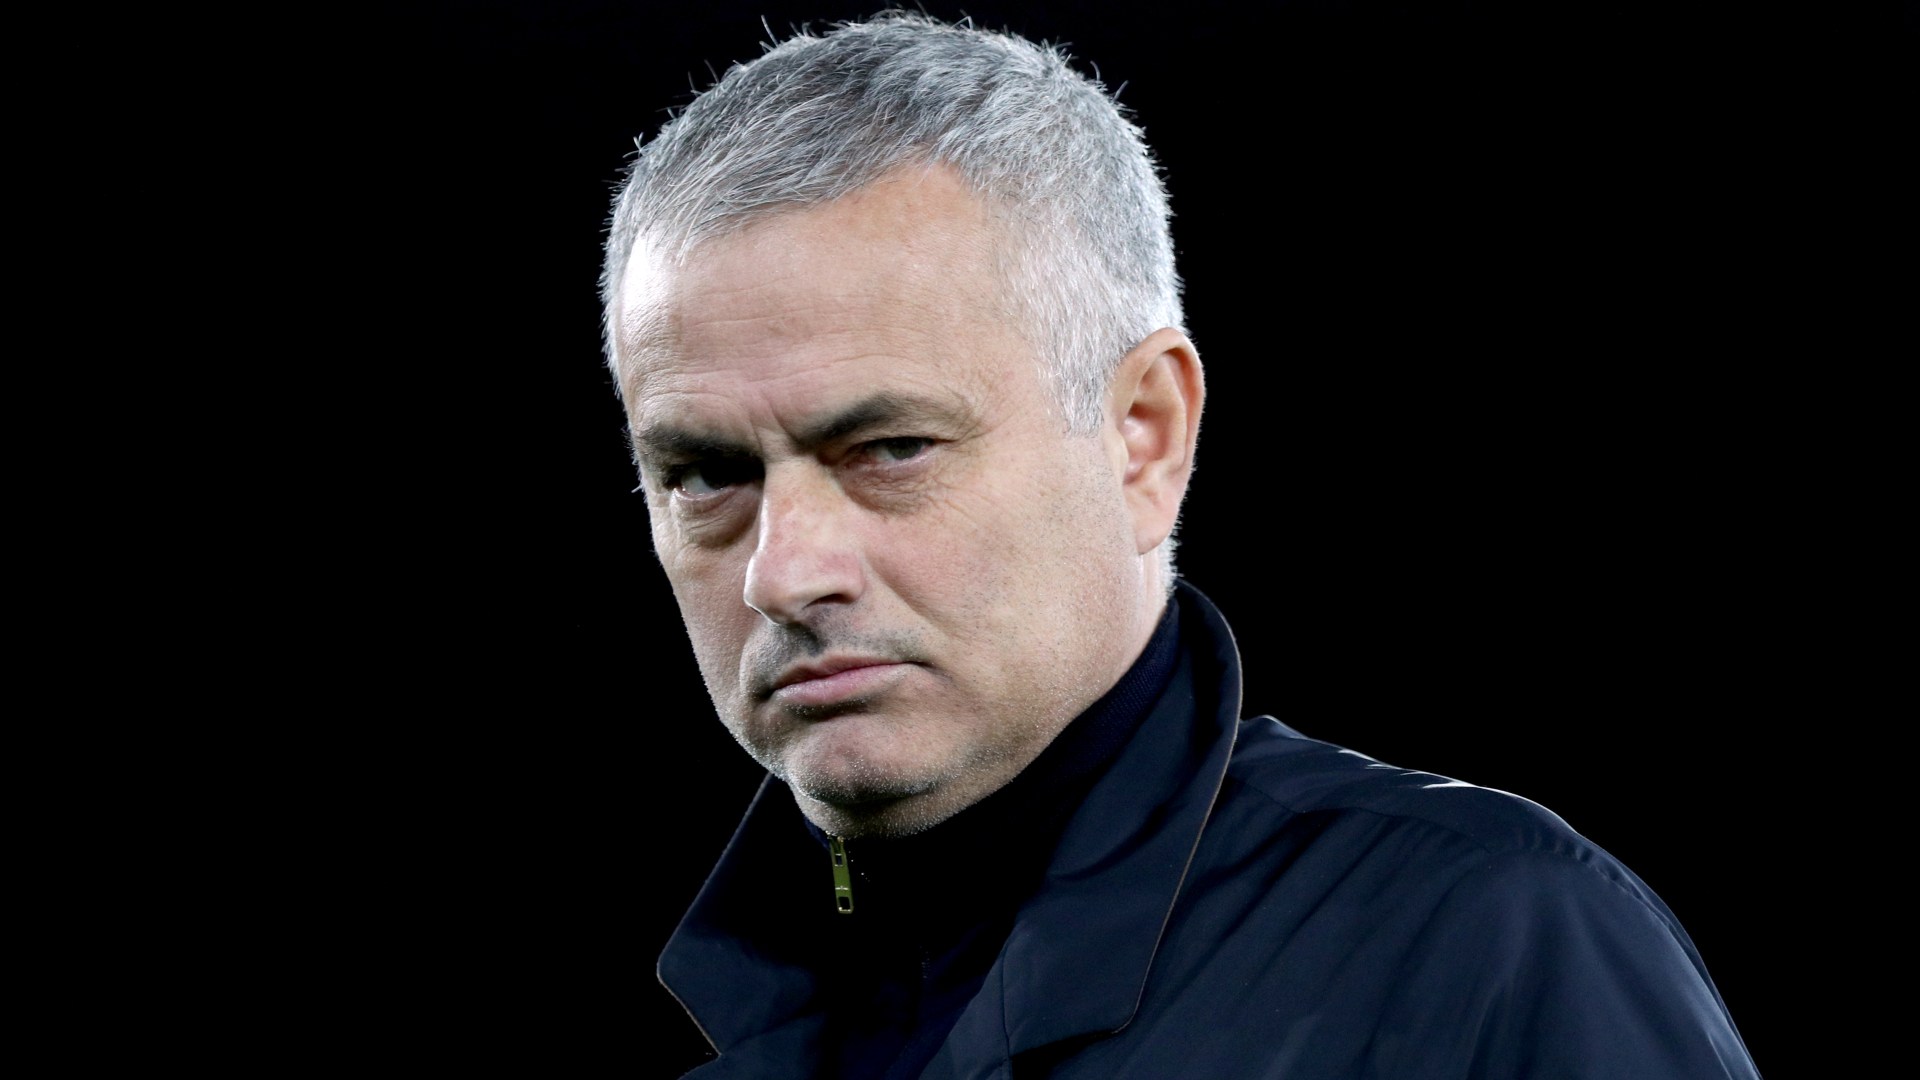 Jose Mourinho ‘approached for shock job at European giants’ after four months unemployed [Video]